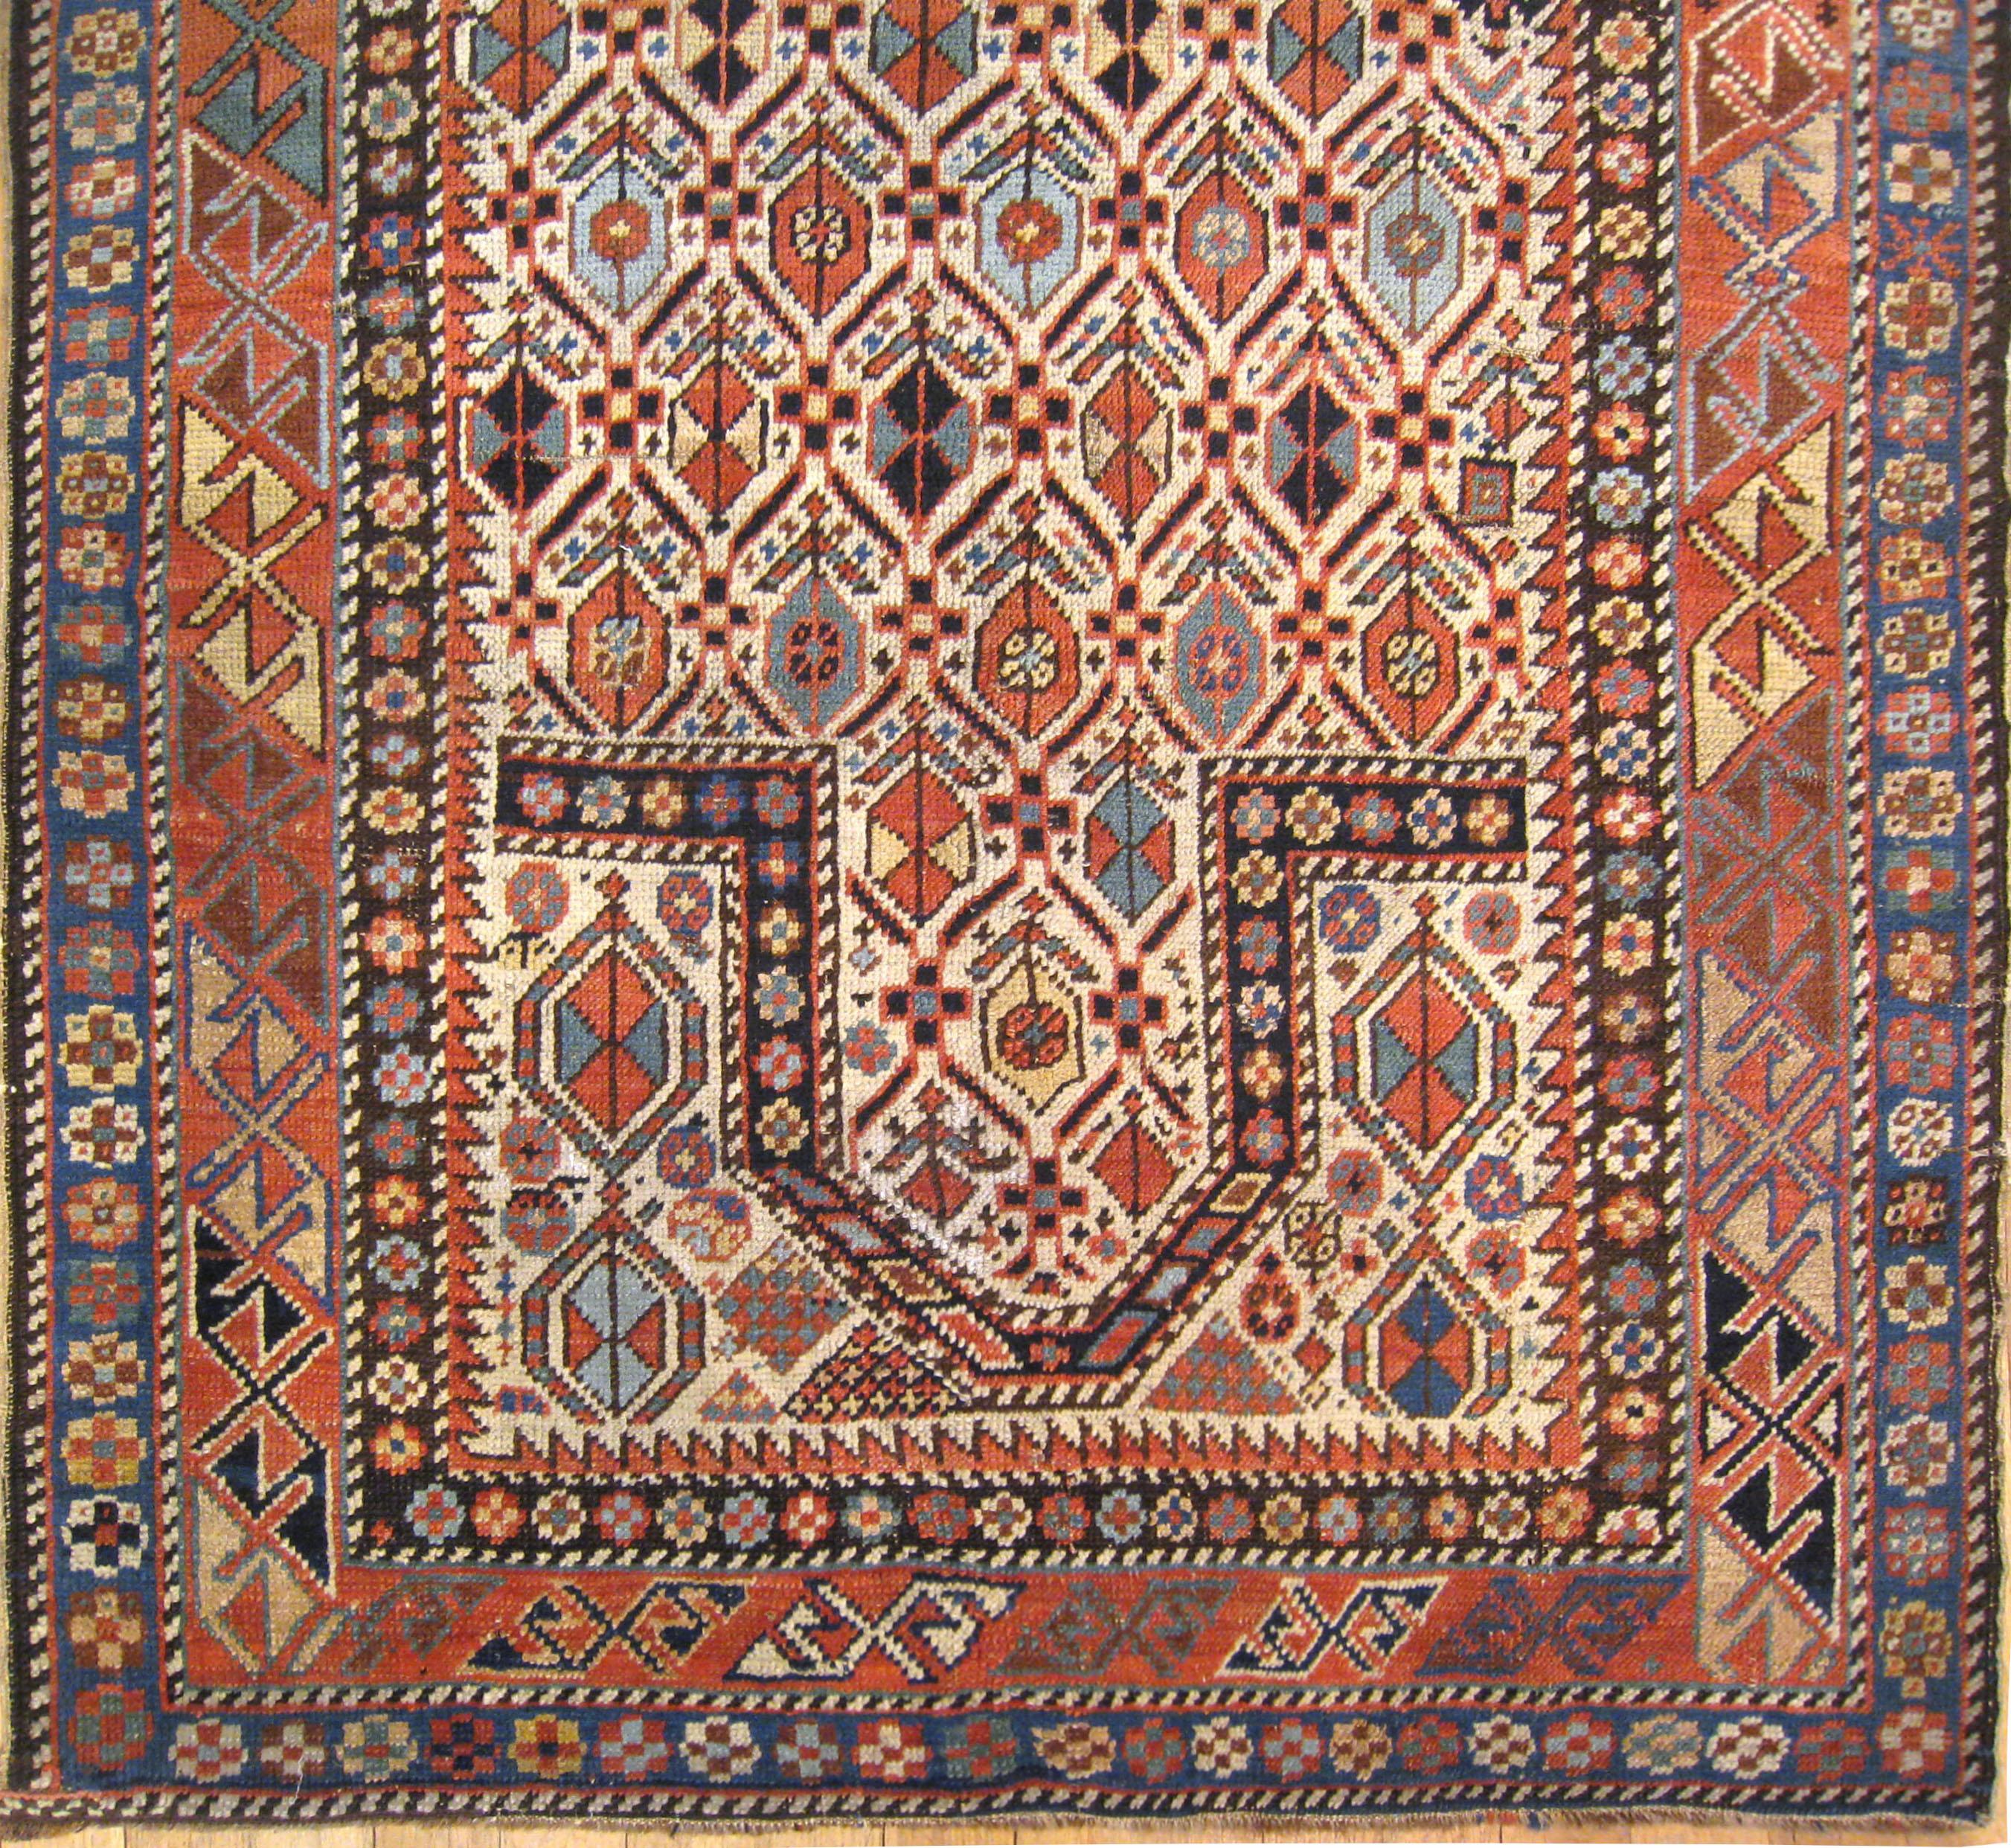 Hand-Knotted Antique Caucasian Kuba Meditation Rug, Small Size, w/ Ivory Field & Prayer Arch